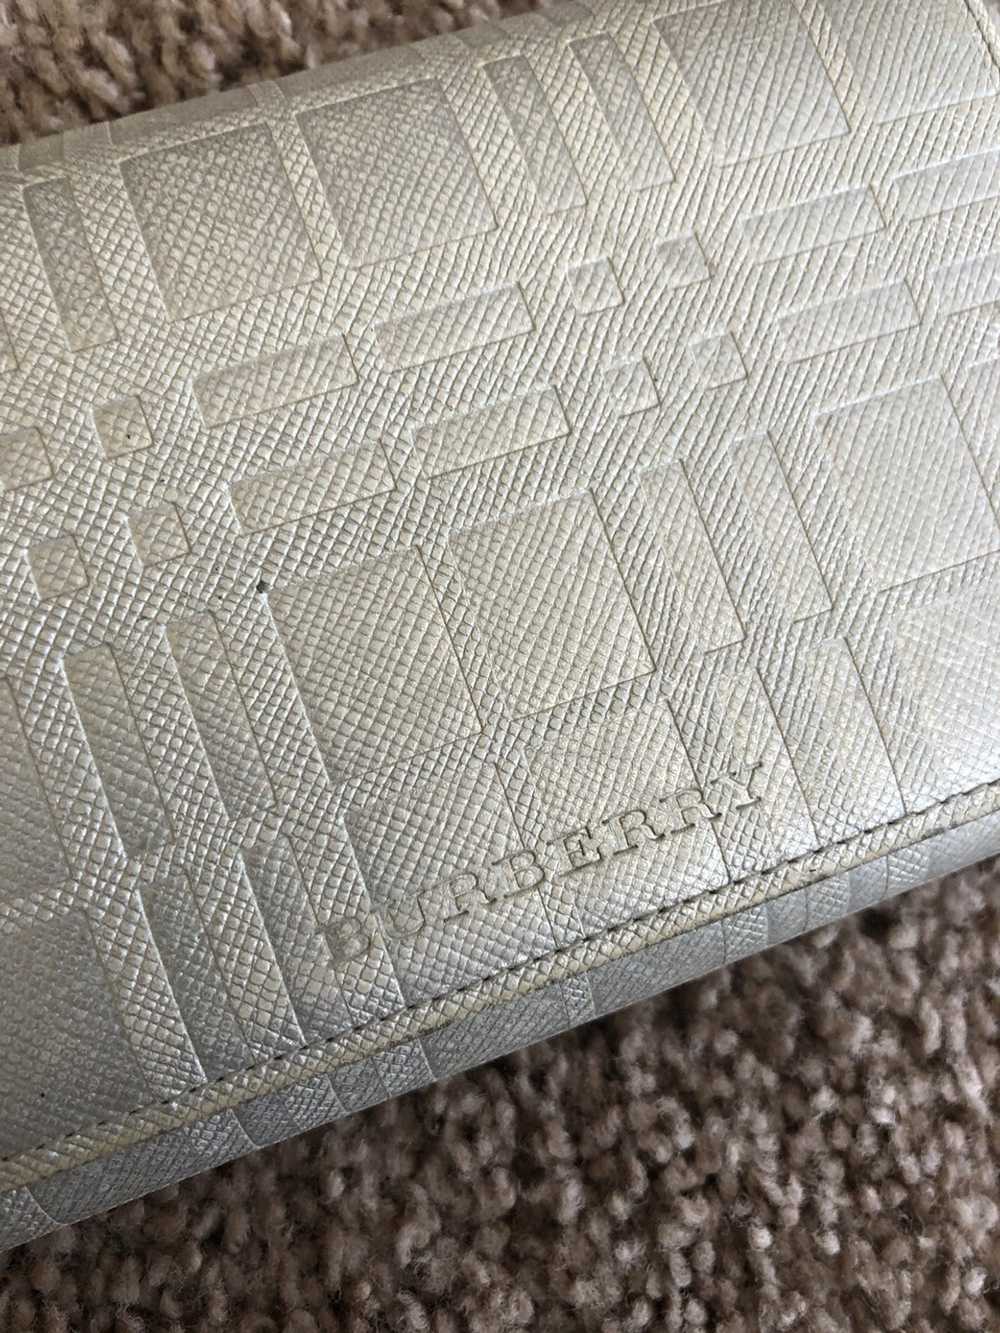 Burberry Burberry leather check trifold wallet - image 3